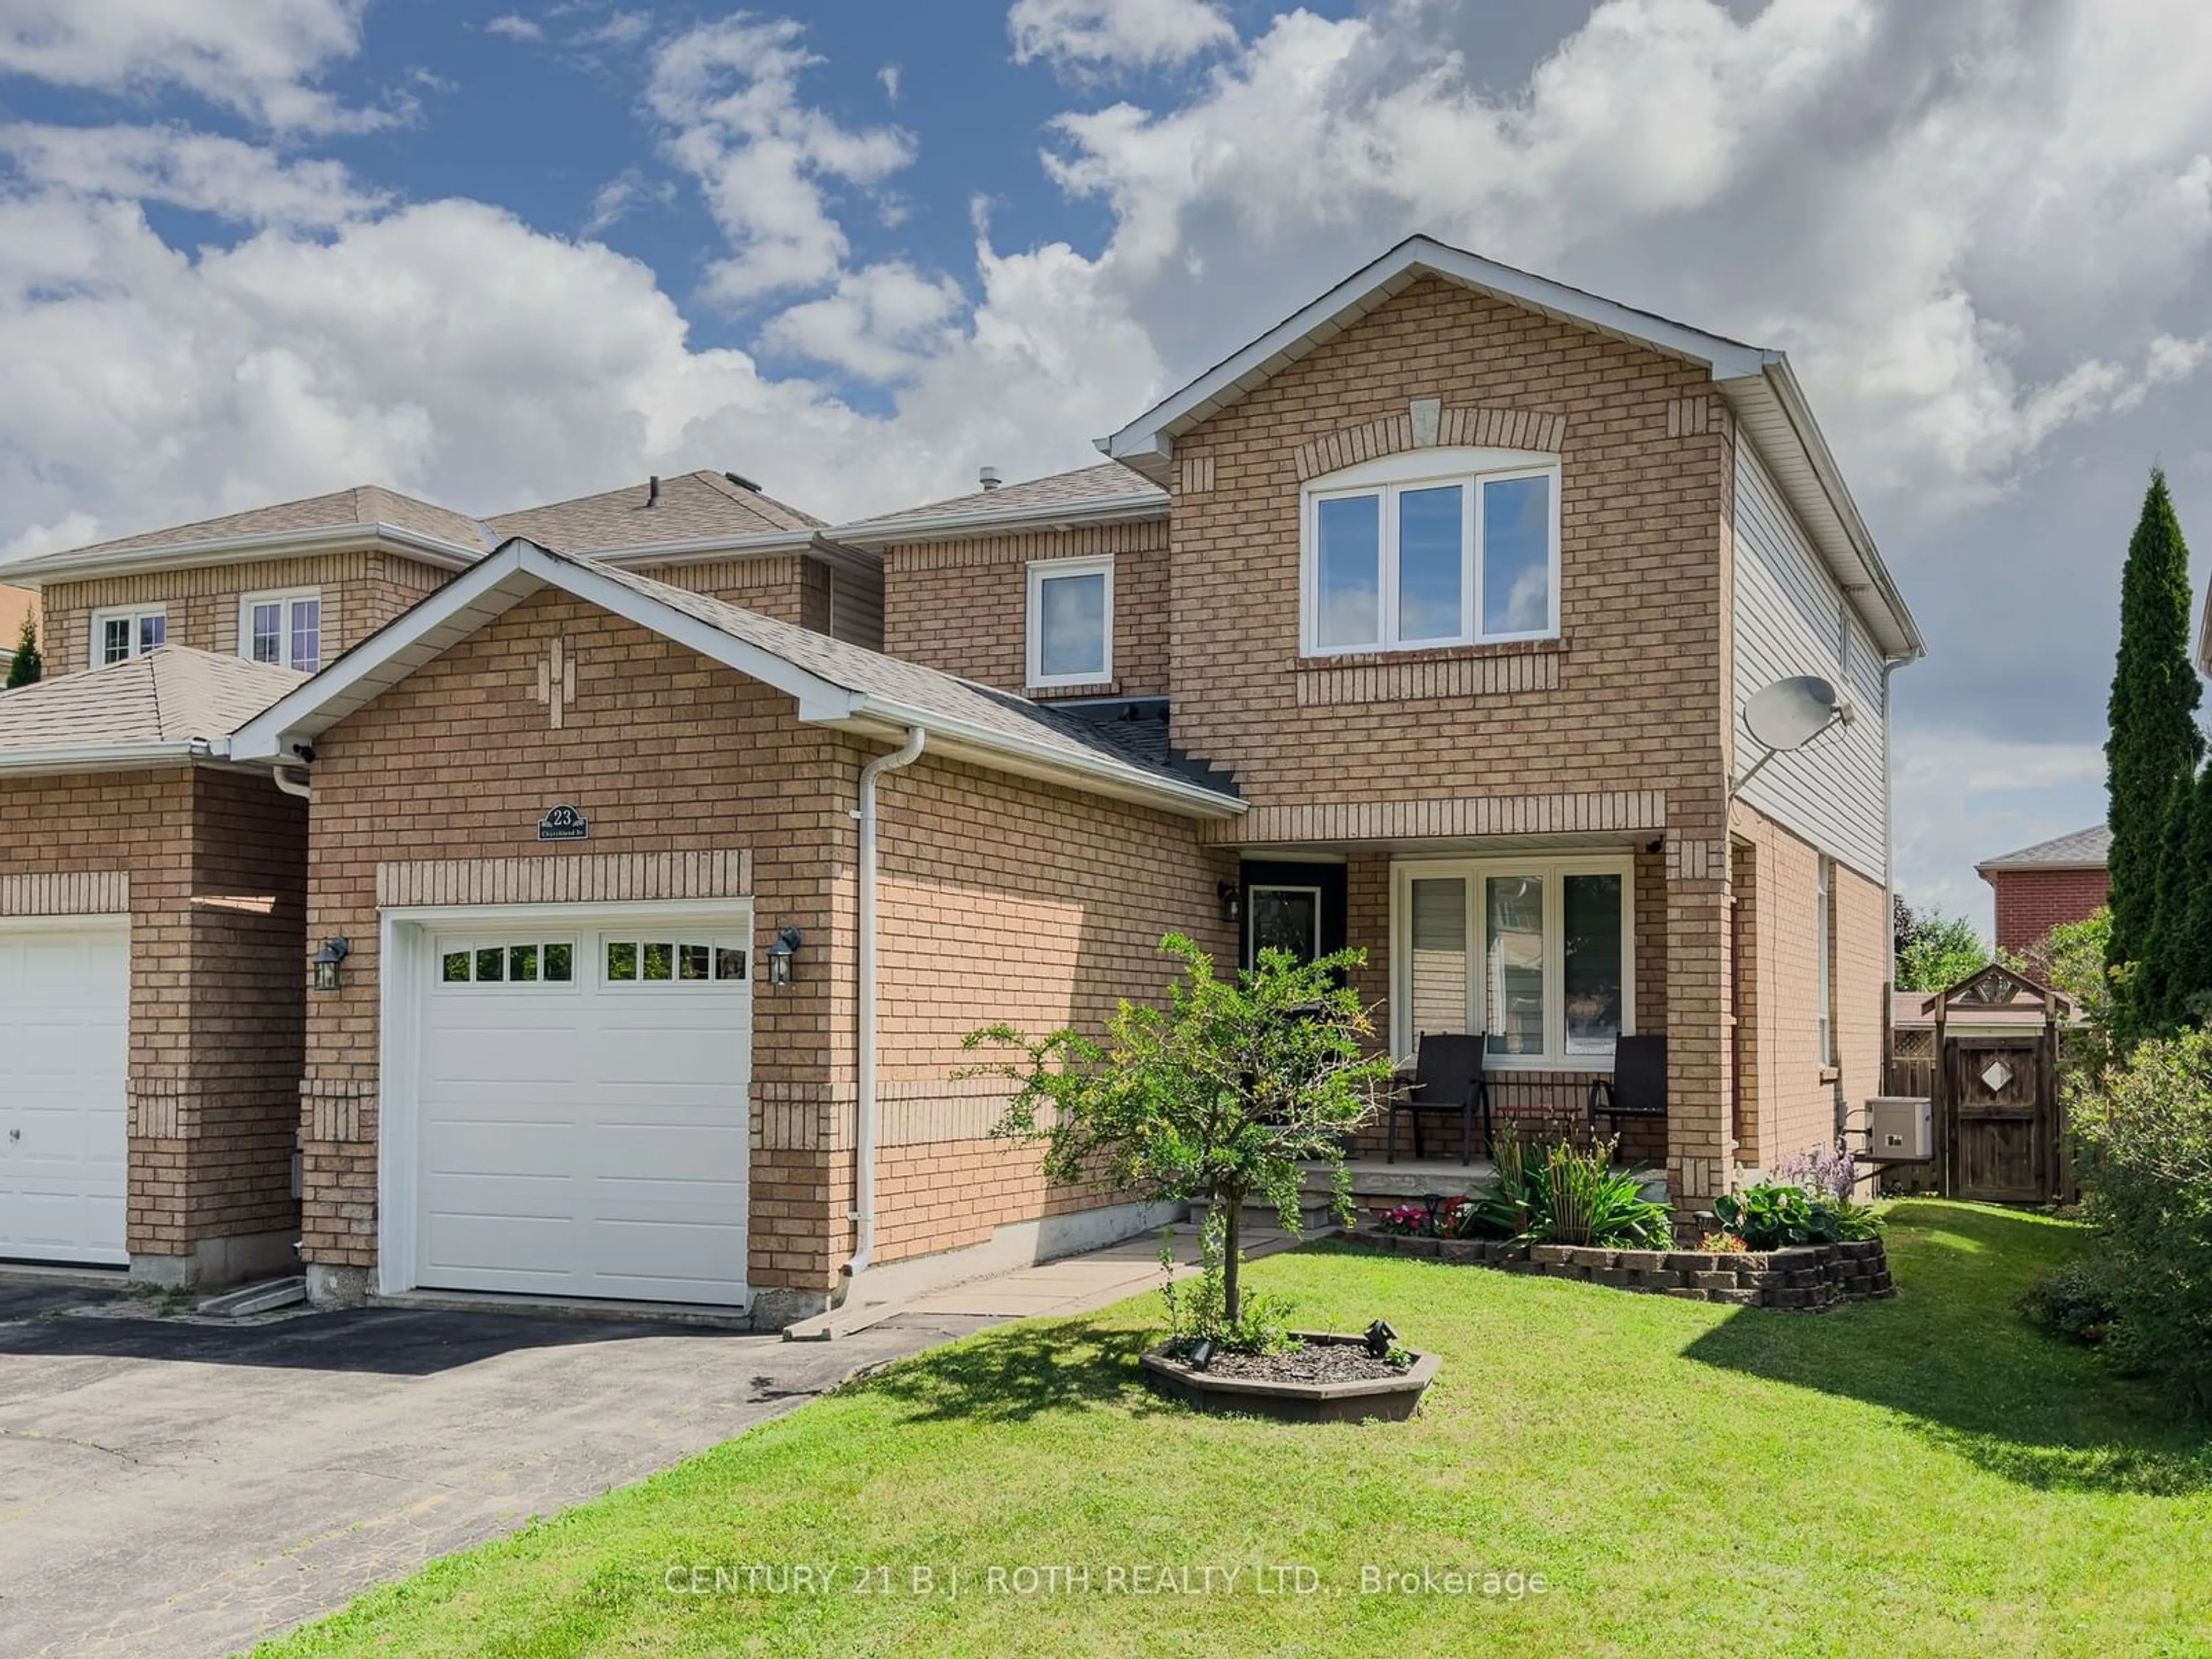 Home with brick exterior material for 23 CHURCHLAND Dr, Barrie Ontario L4N 8P9